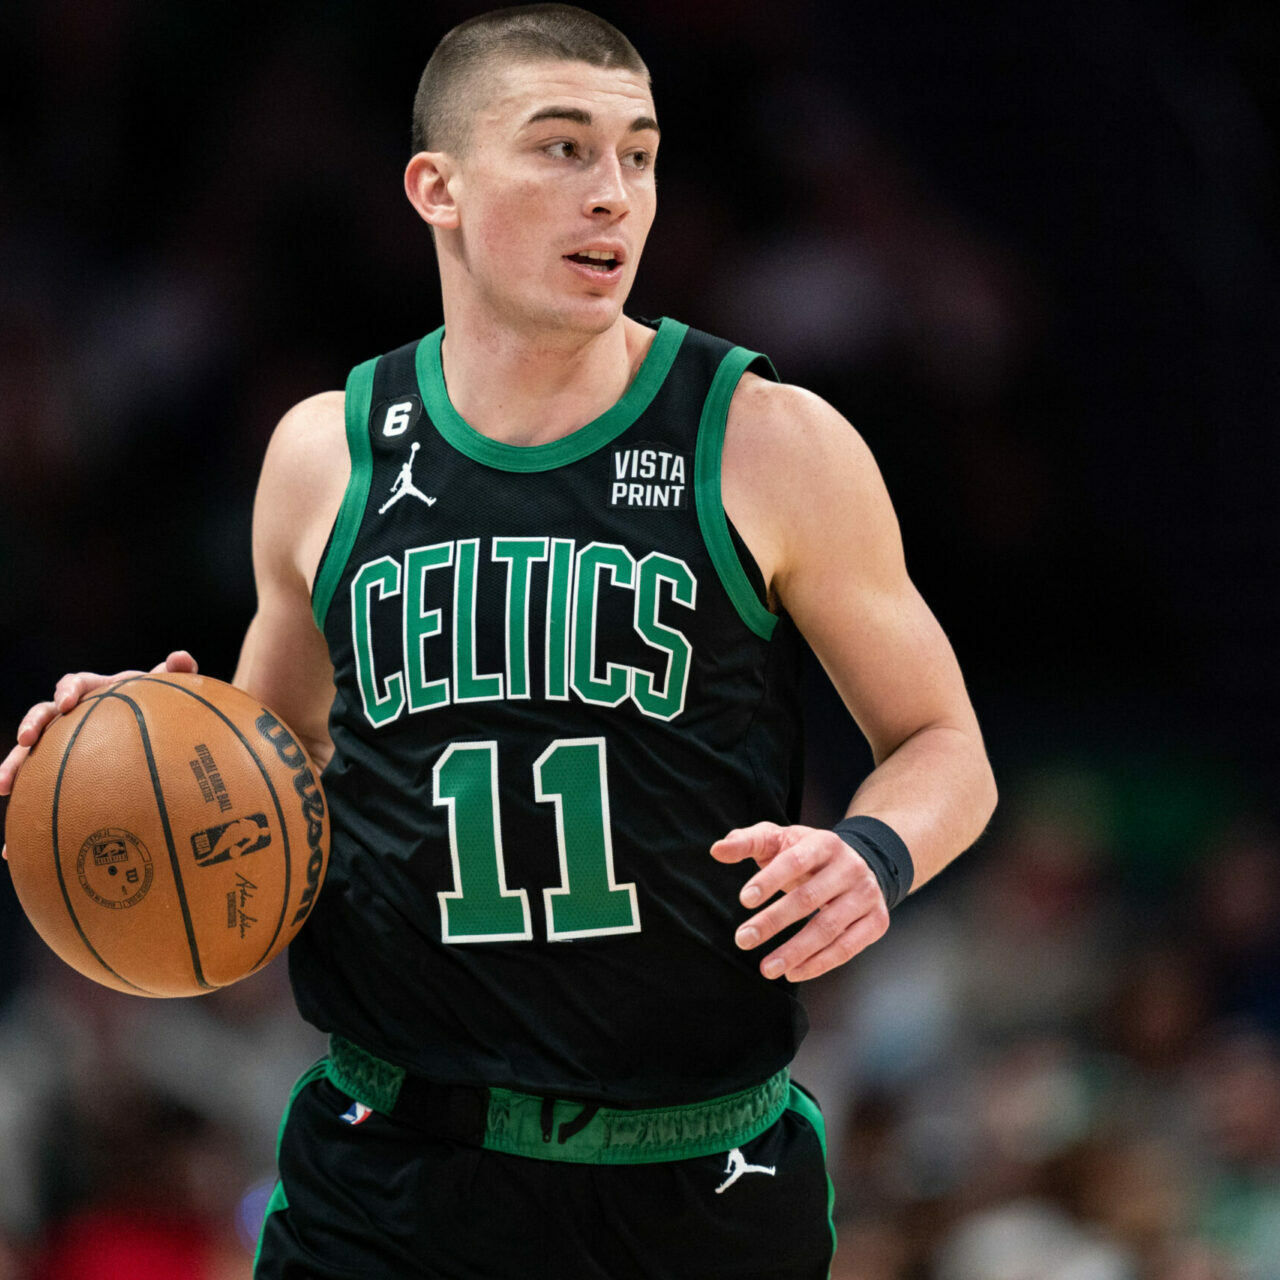 CHARLOTTE, NORTH CAROLINA - JANUARY 16: Payton Pritchard #11 of the Boston Celtics brings the ball up court against the Charlotte Hornets during their game at Spectrum Center on January 16, 2023 in Charlotte, North Carolina. NOTE TO USER: User expressly acknowledges and agrees that, by downloading and or using this photograph, User is consenting to the terms and conditions of the Getty Images License Agreement. (Photo by Jacob Kupferman/Getty Images)